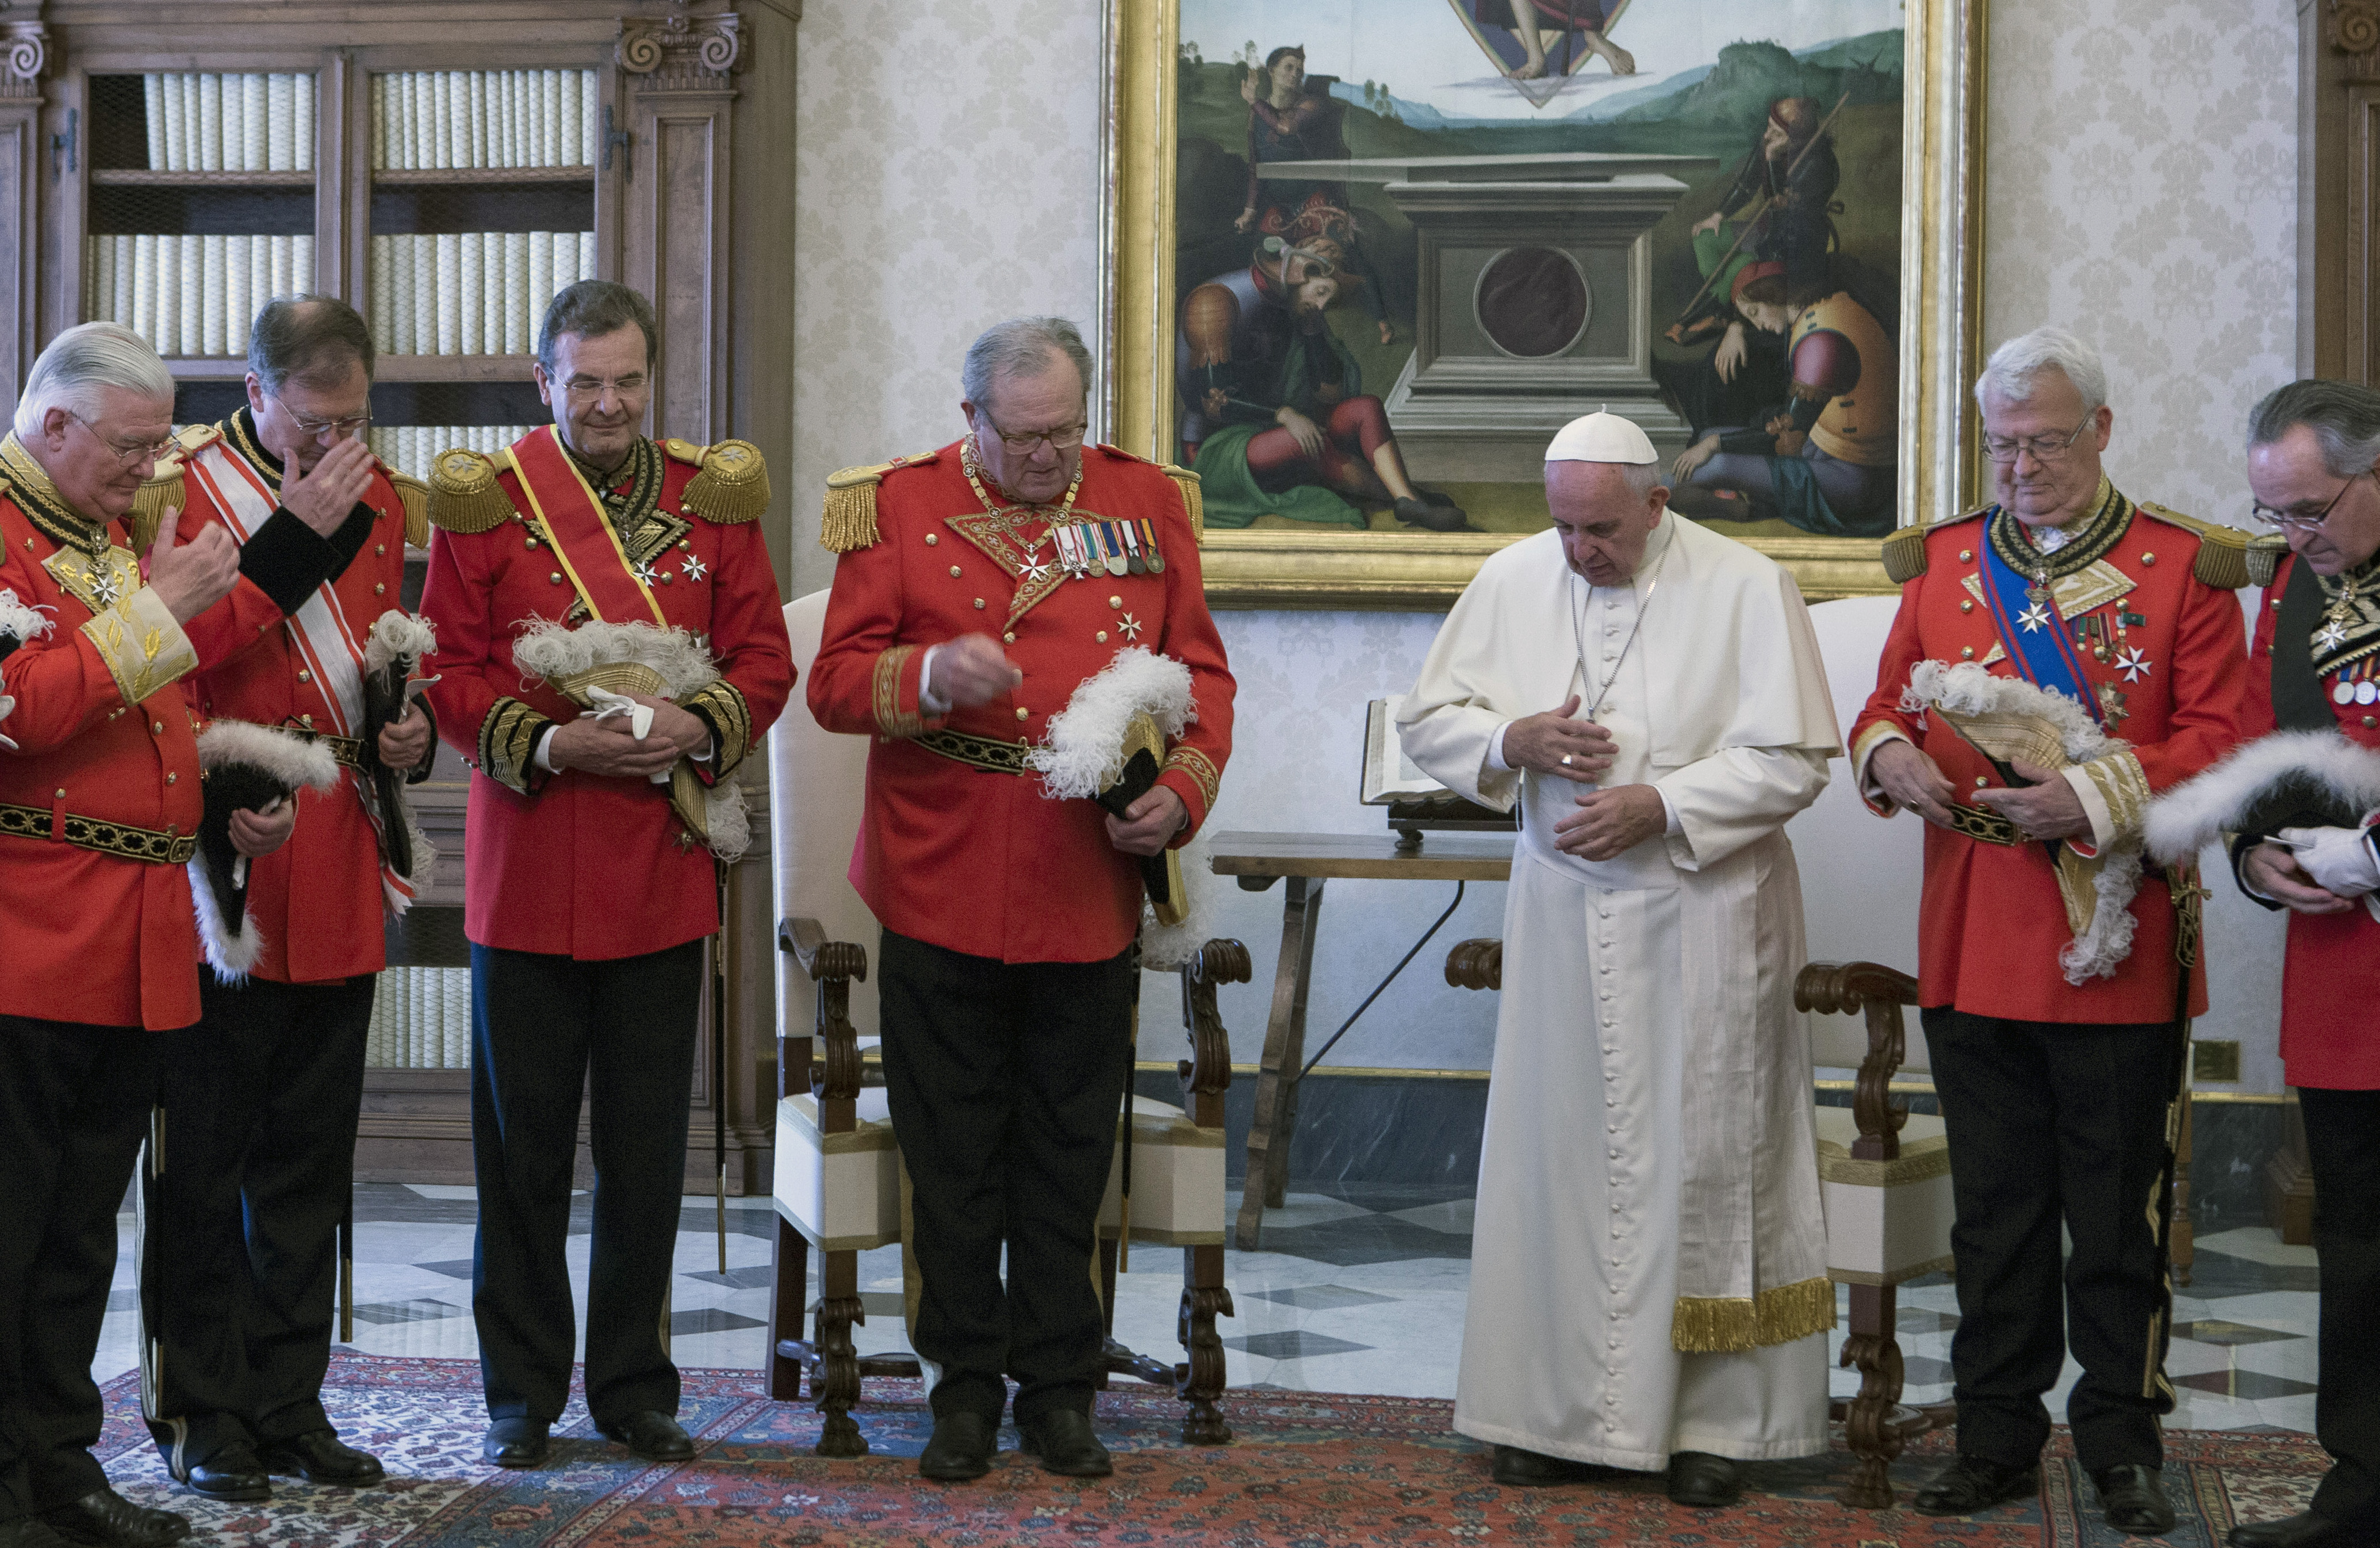 Knights of Malta enduring ‘painful’ reforms